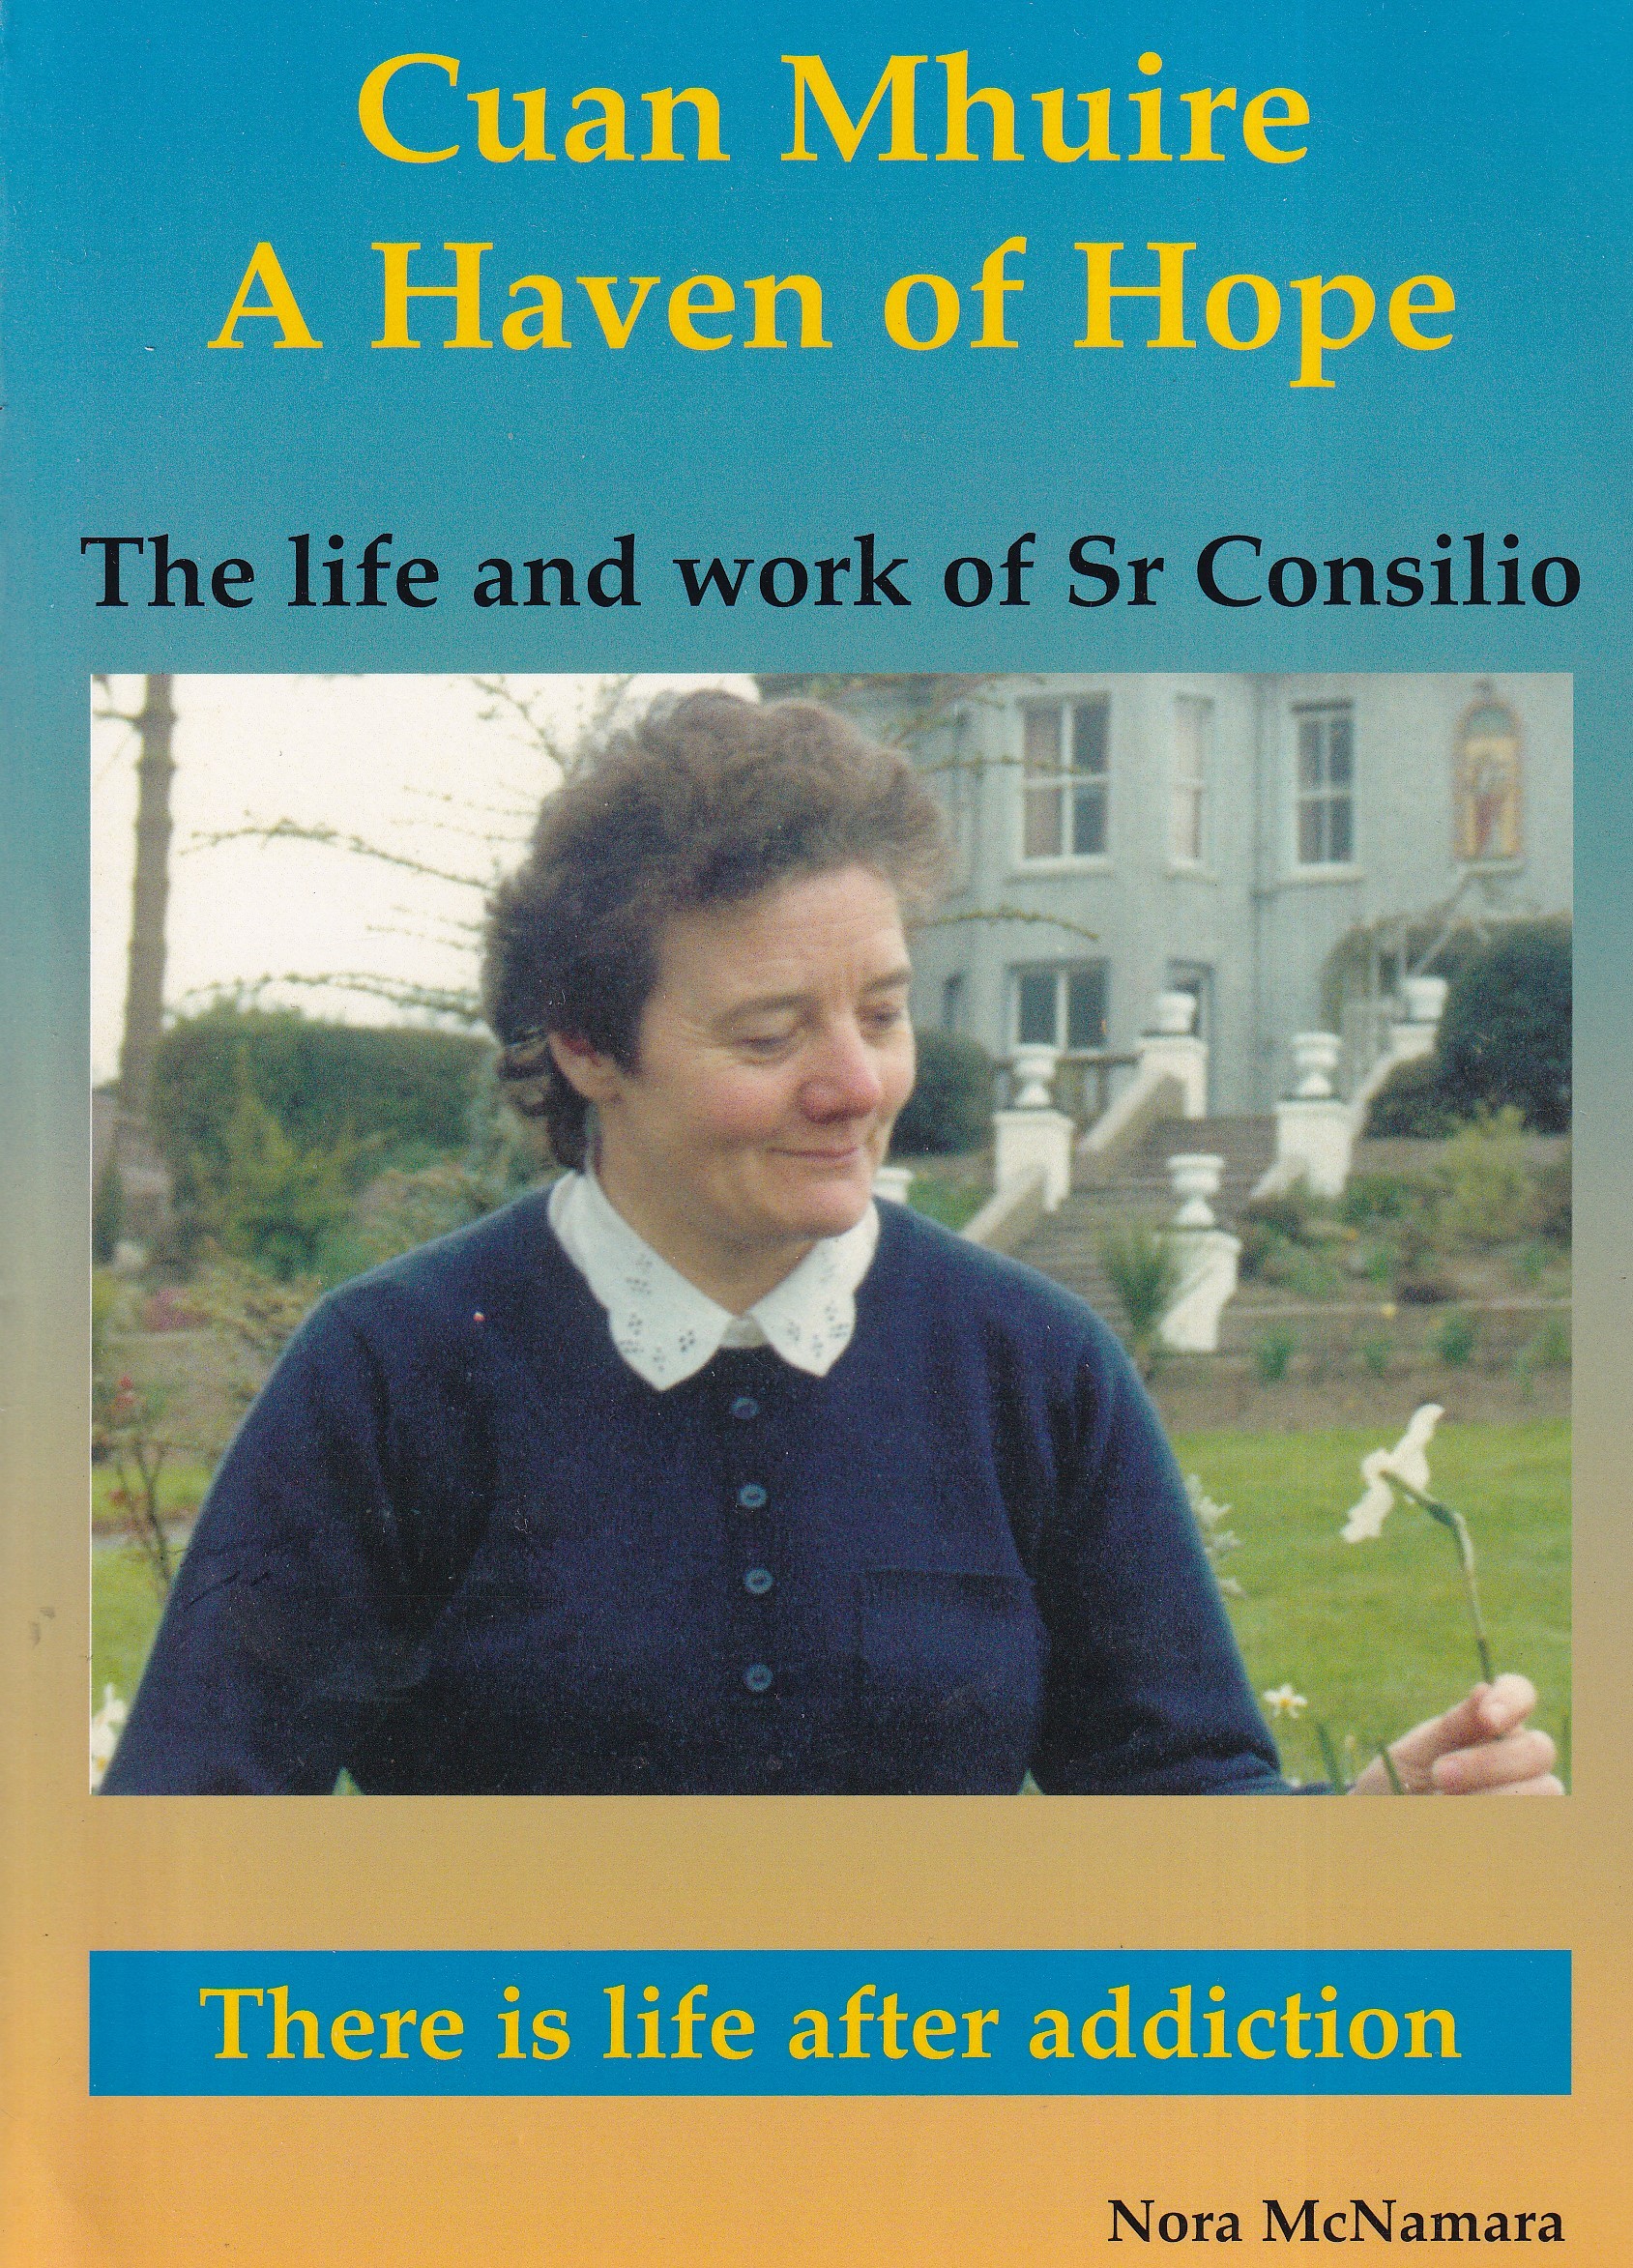 Cuan Mhuire, A Haven of Hope: The Life and Work of Sr Consilio | Nora McNamara | Charlie Byrne's